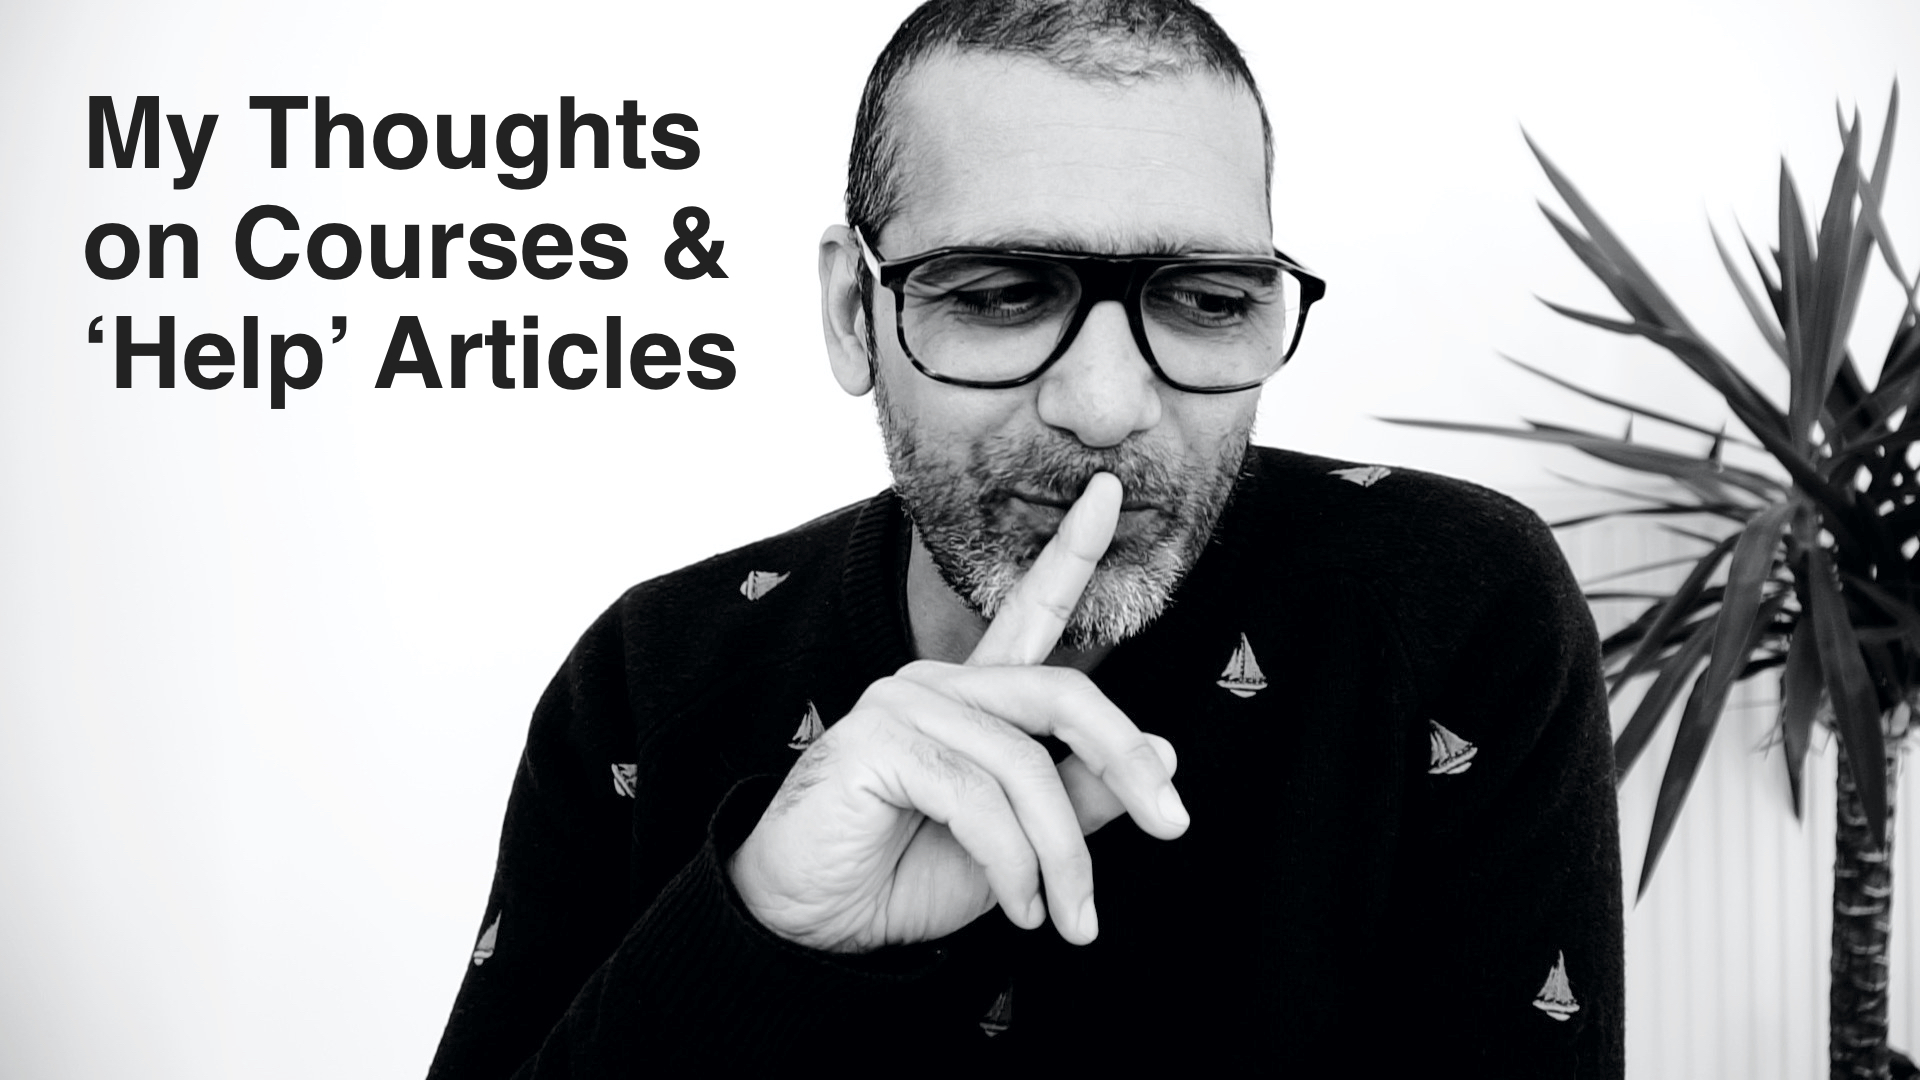 My thoughts on online courses & ‘help’ articles